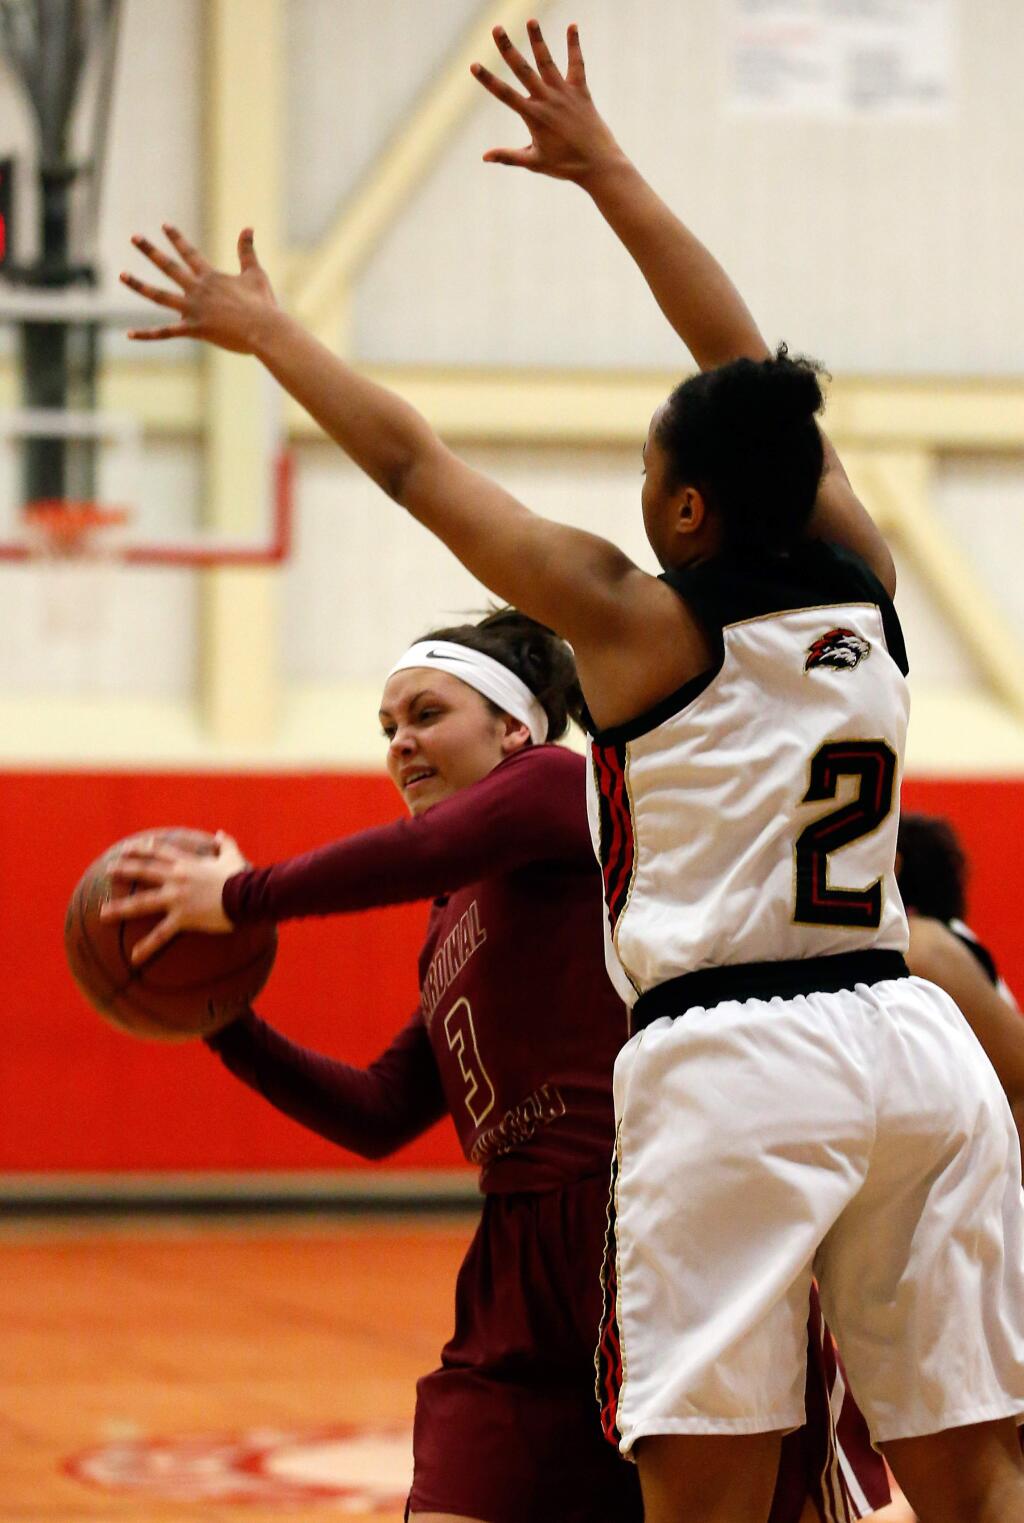 Cardinal Newman's Maiya Flores (3) is pressured to pass the ball by Salesian's Taimane Lesa-Hardee (2) during the first half of the NCS Division 4 championship girls basketball game between Cardinal Newman and Salesian Prep high schools in Albany, California, on Saturday, March 5, 2016. (Alvin Jornada / The Press Democrat)